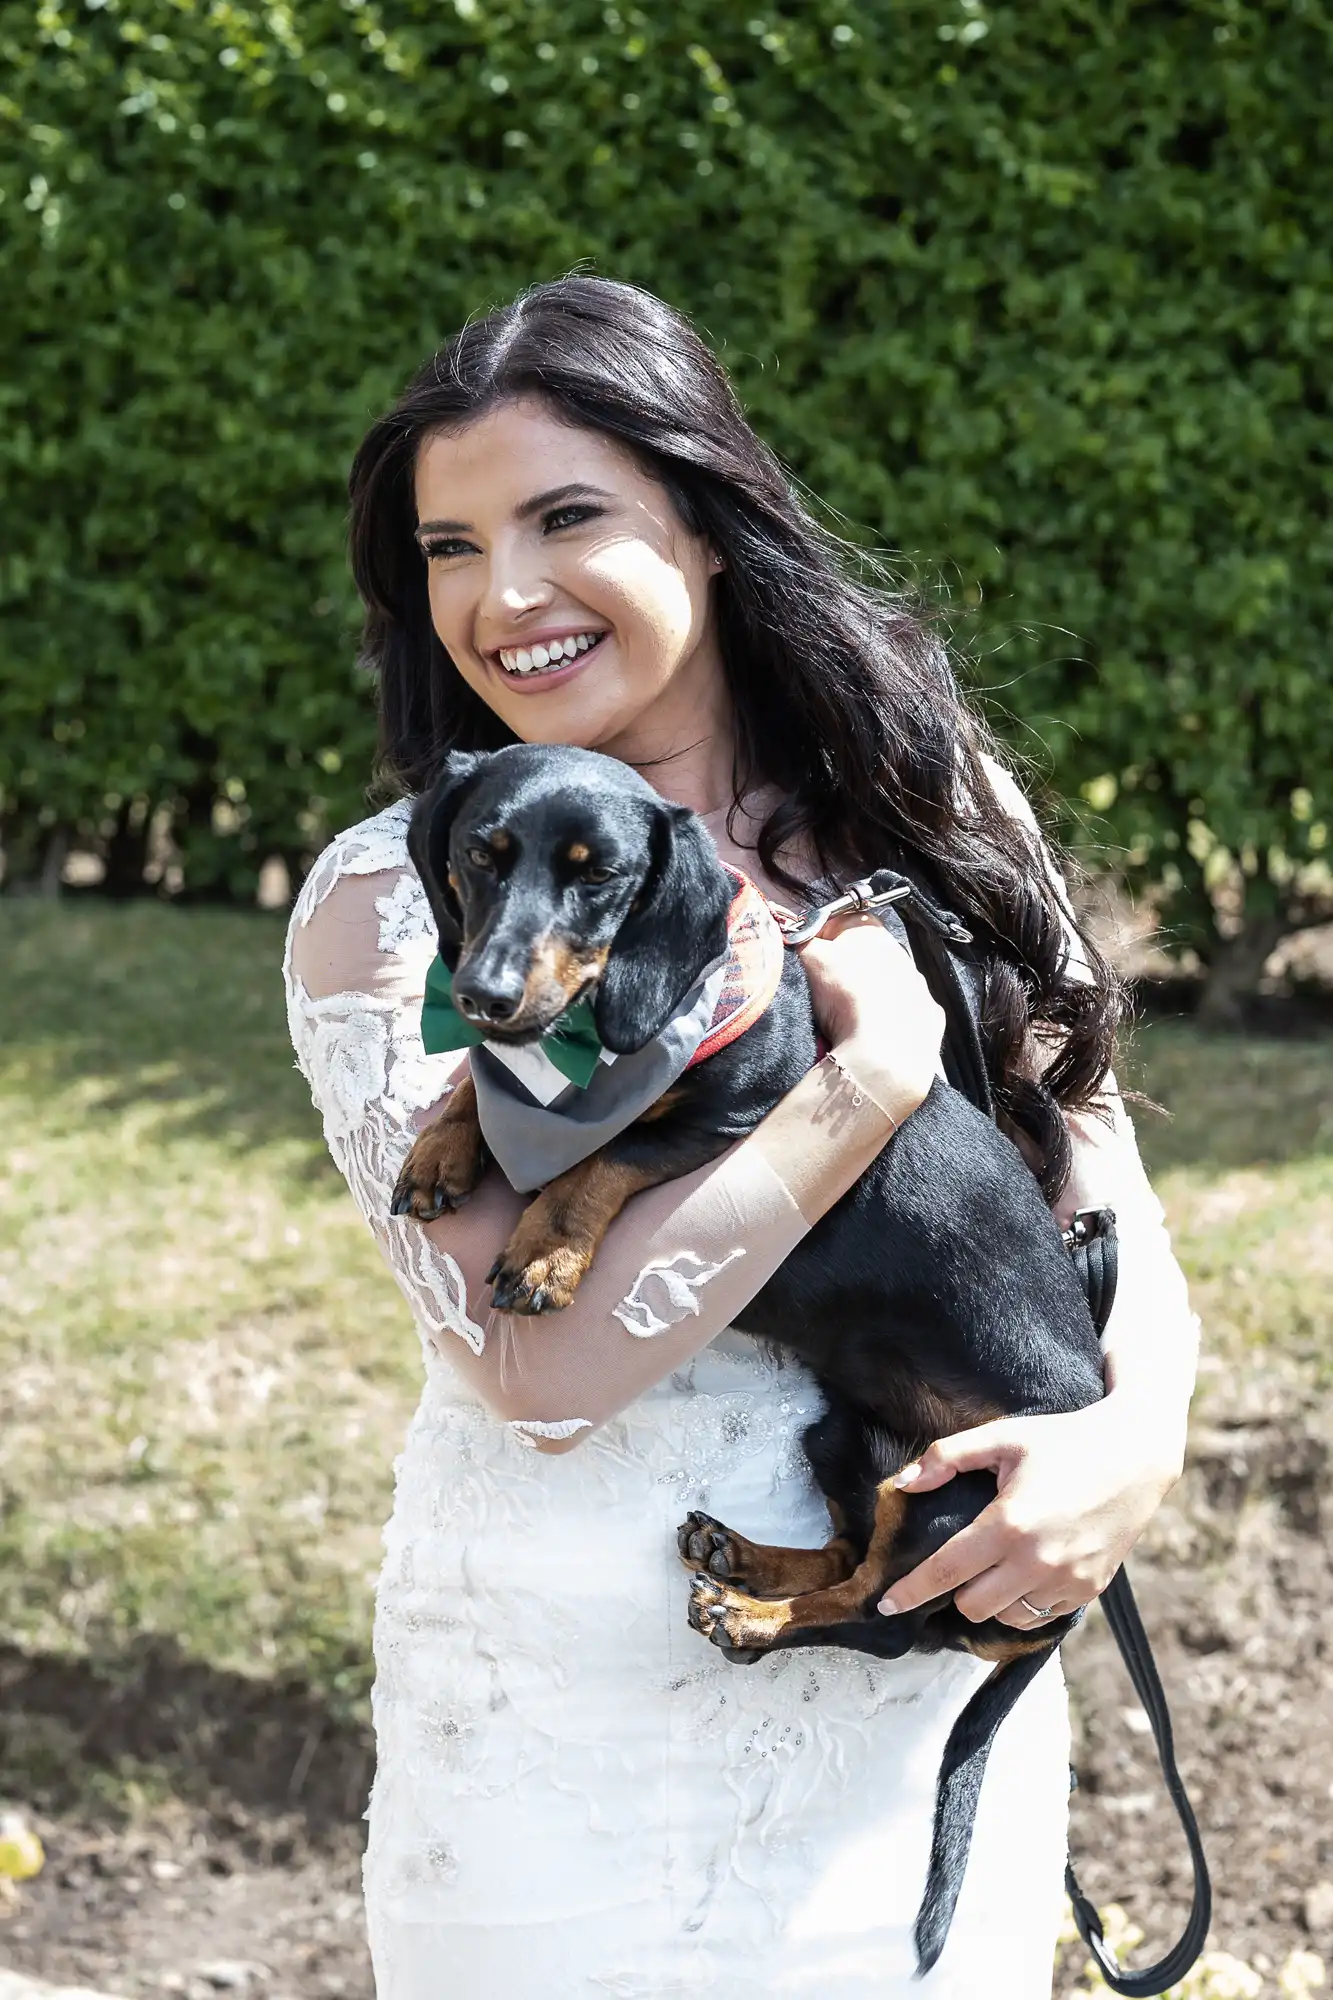 A woman in a white dress smiles broadly while holding a dachshund in a harness at a sunny outdoor setting.